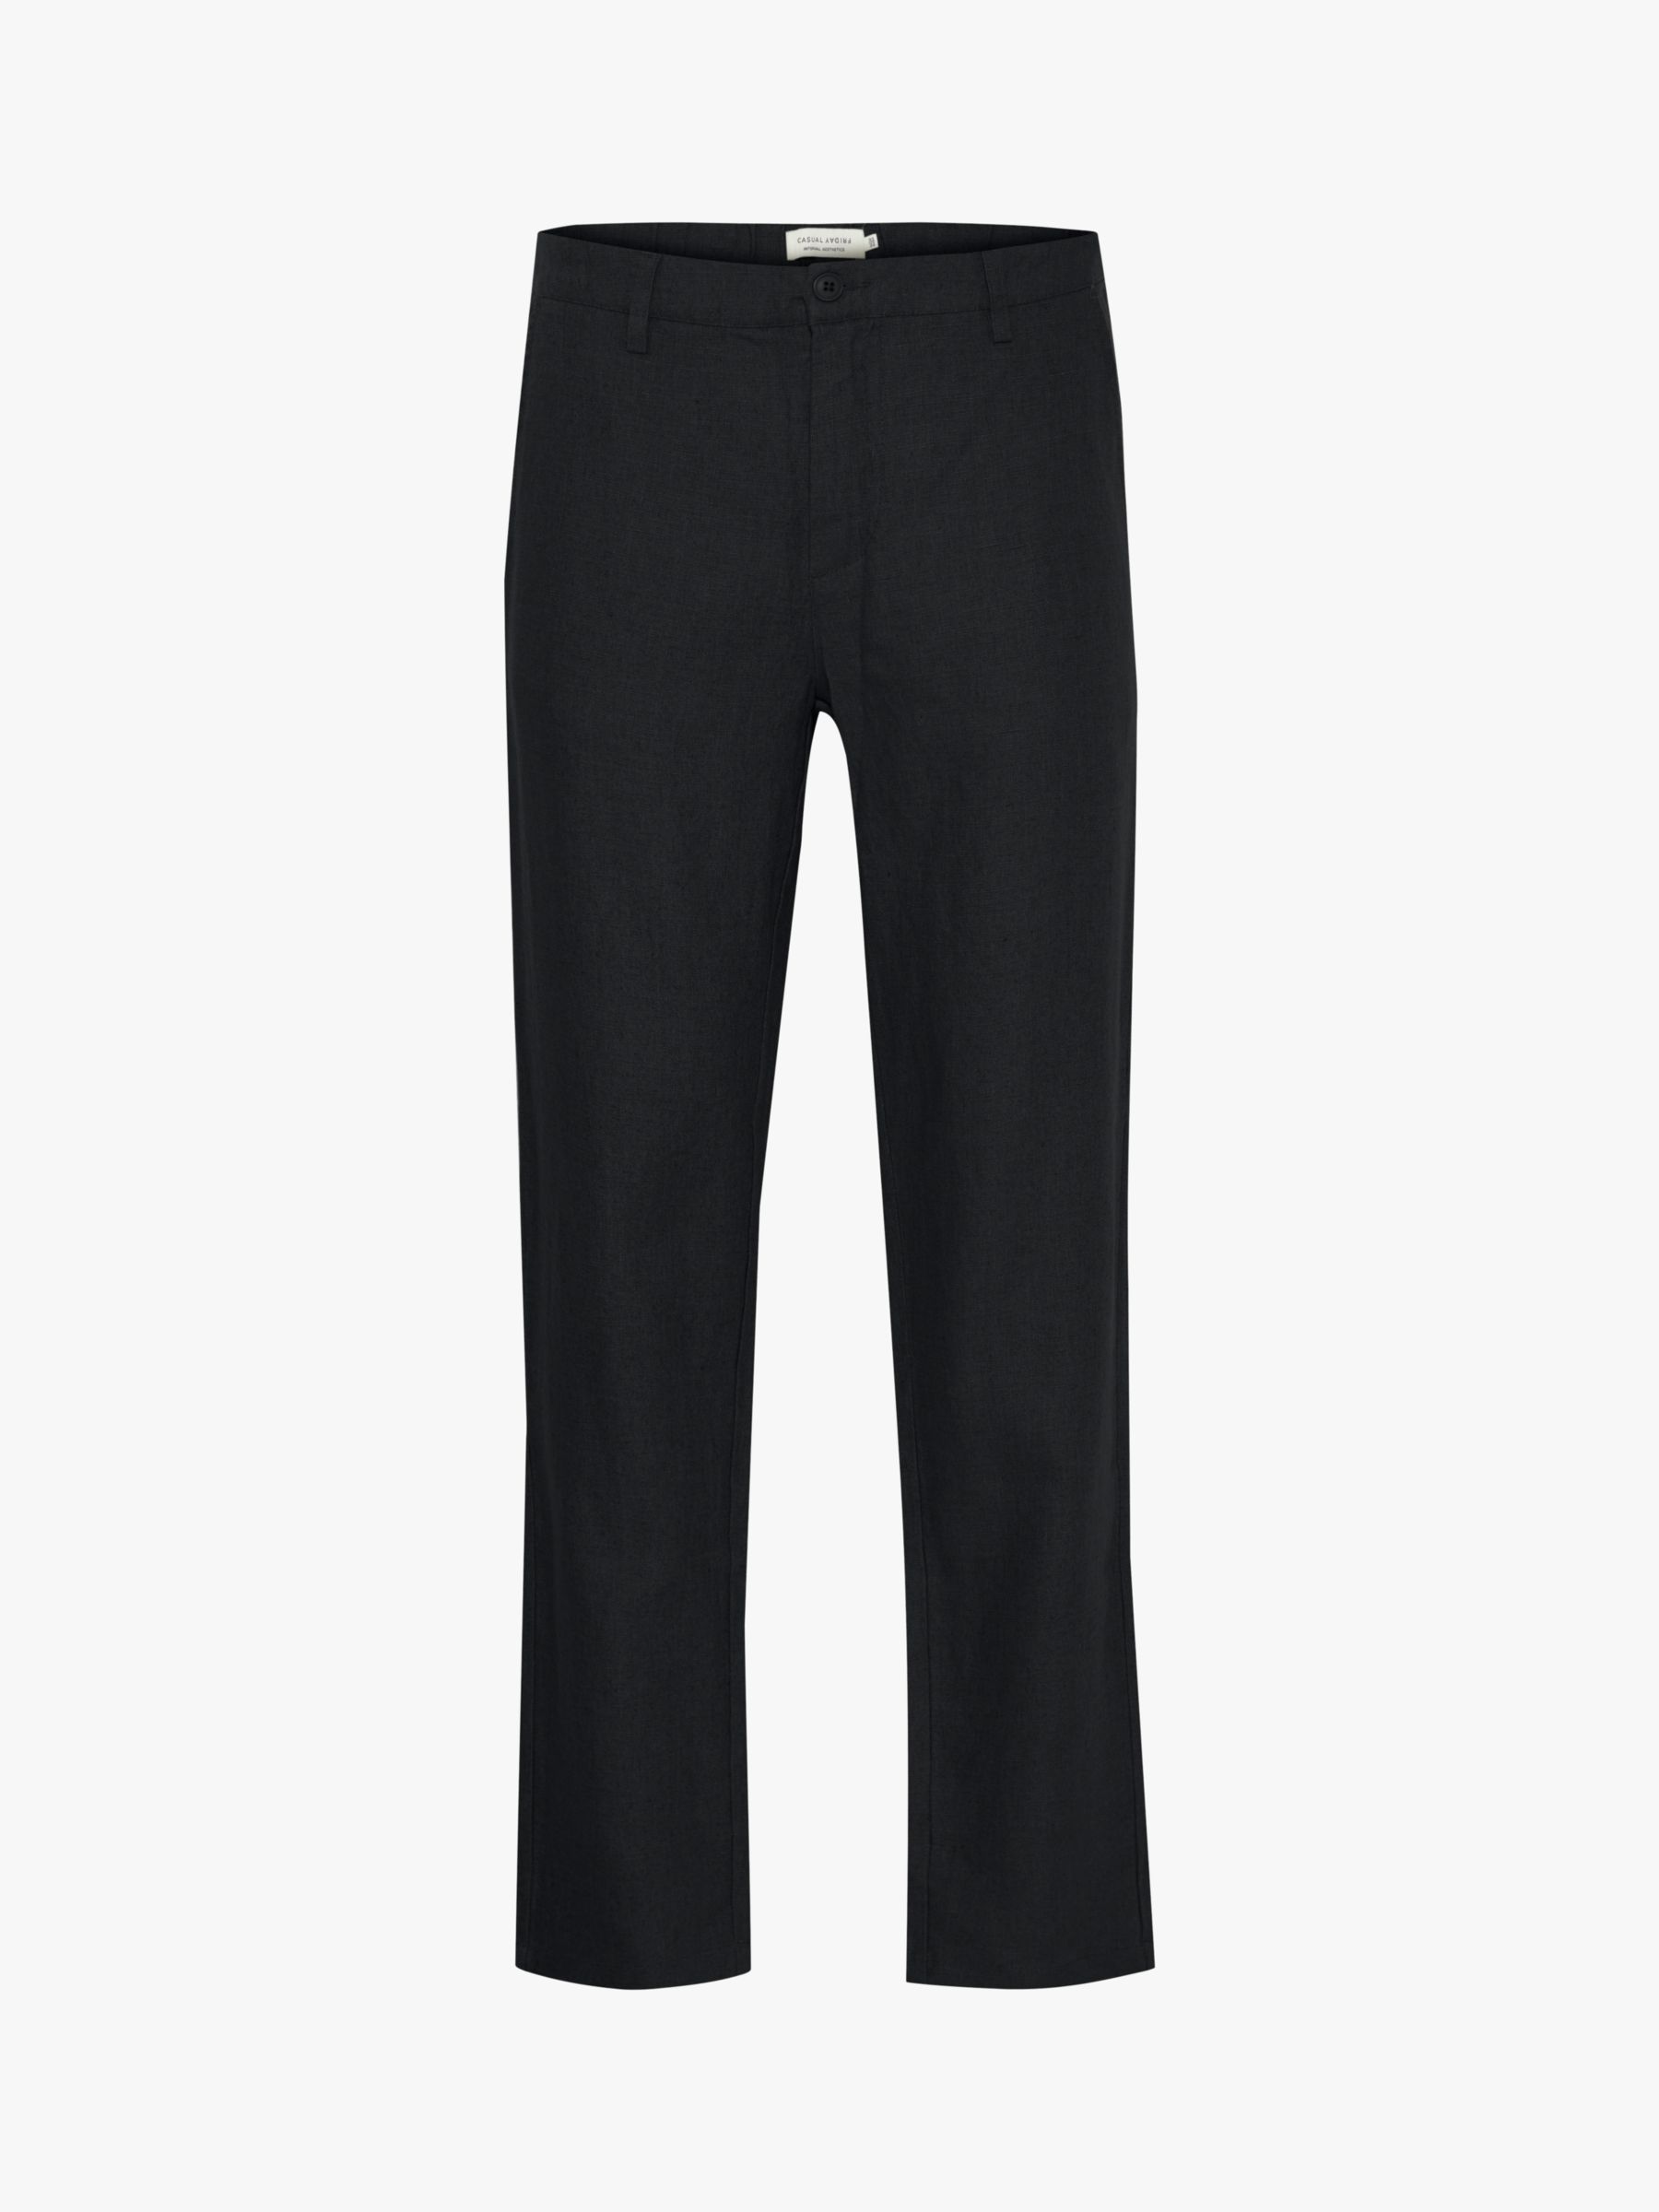 Casual Friday Pandrup Regular Fit Linen Trousers, Black, 28R